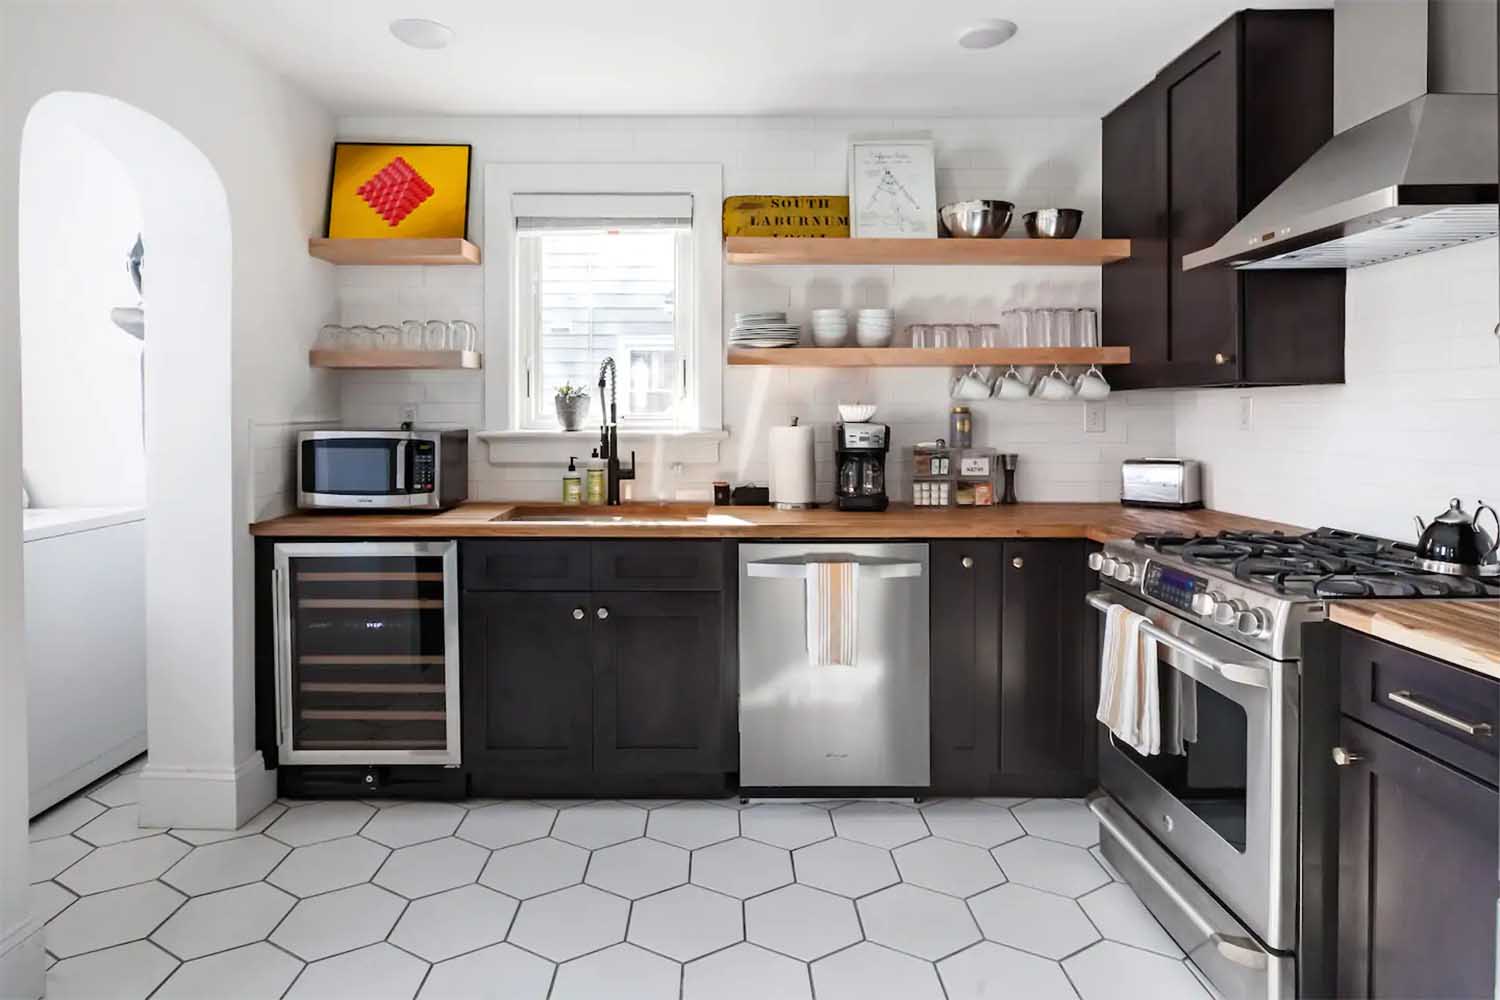 10 Airbnbs With Highly Covetable Dream Kitchens